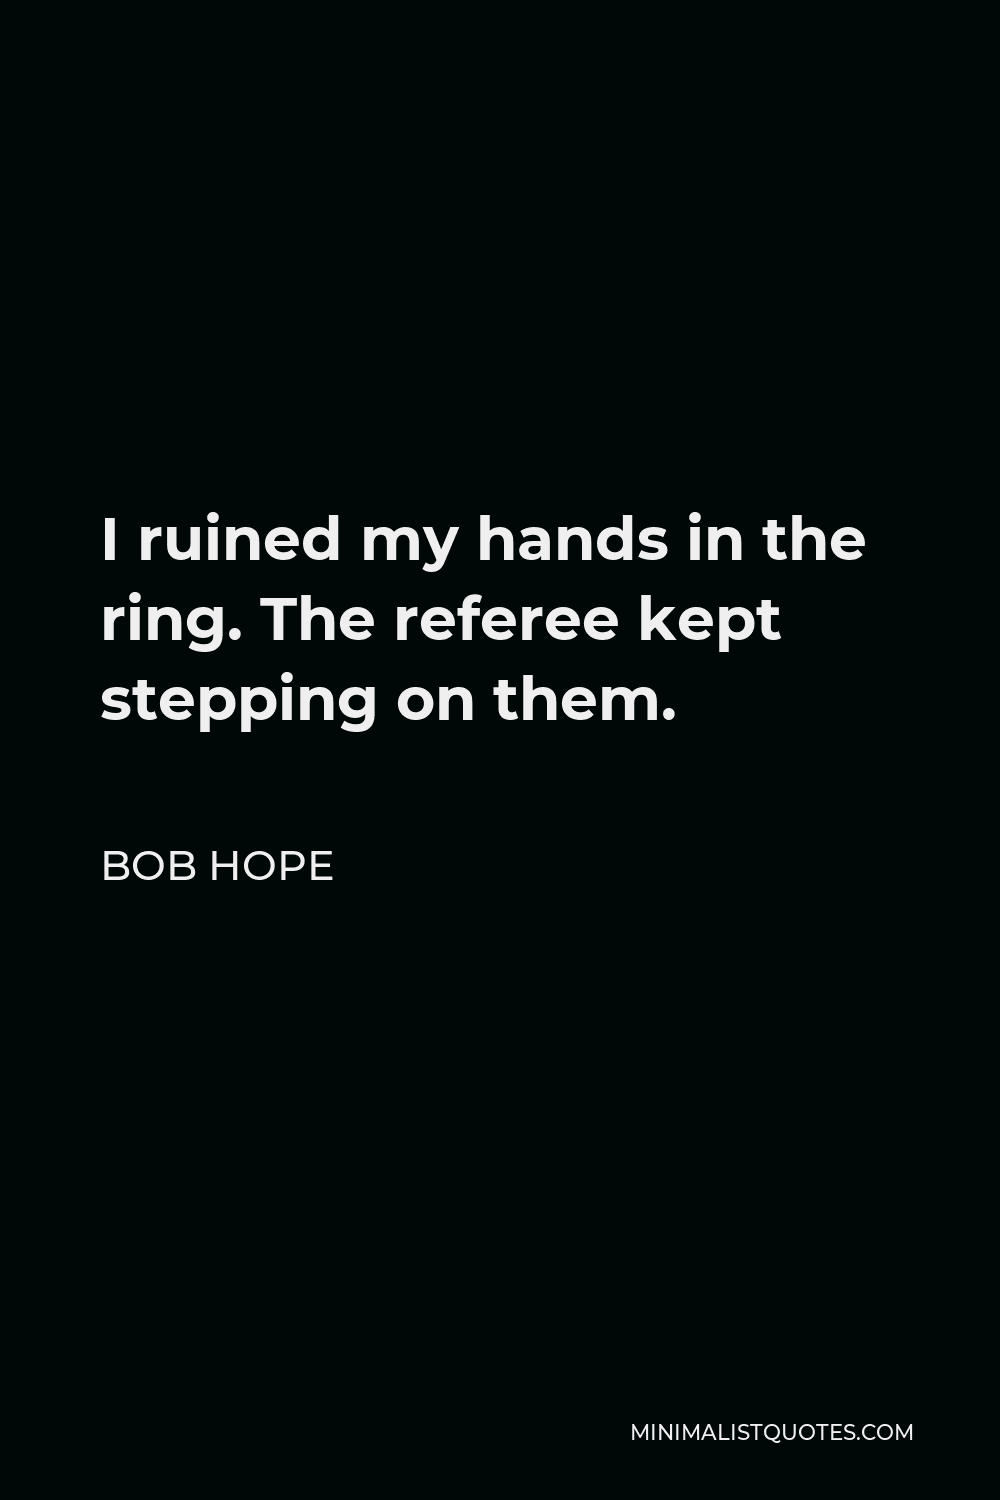 Bob Hope Quote - I ruined my hands in the ring. The referee kept stepping on them.